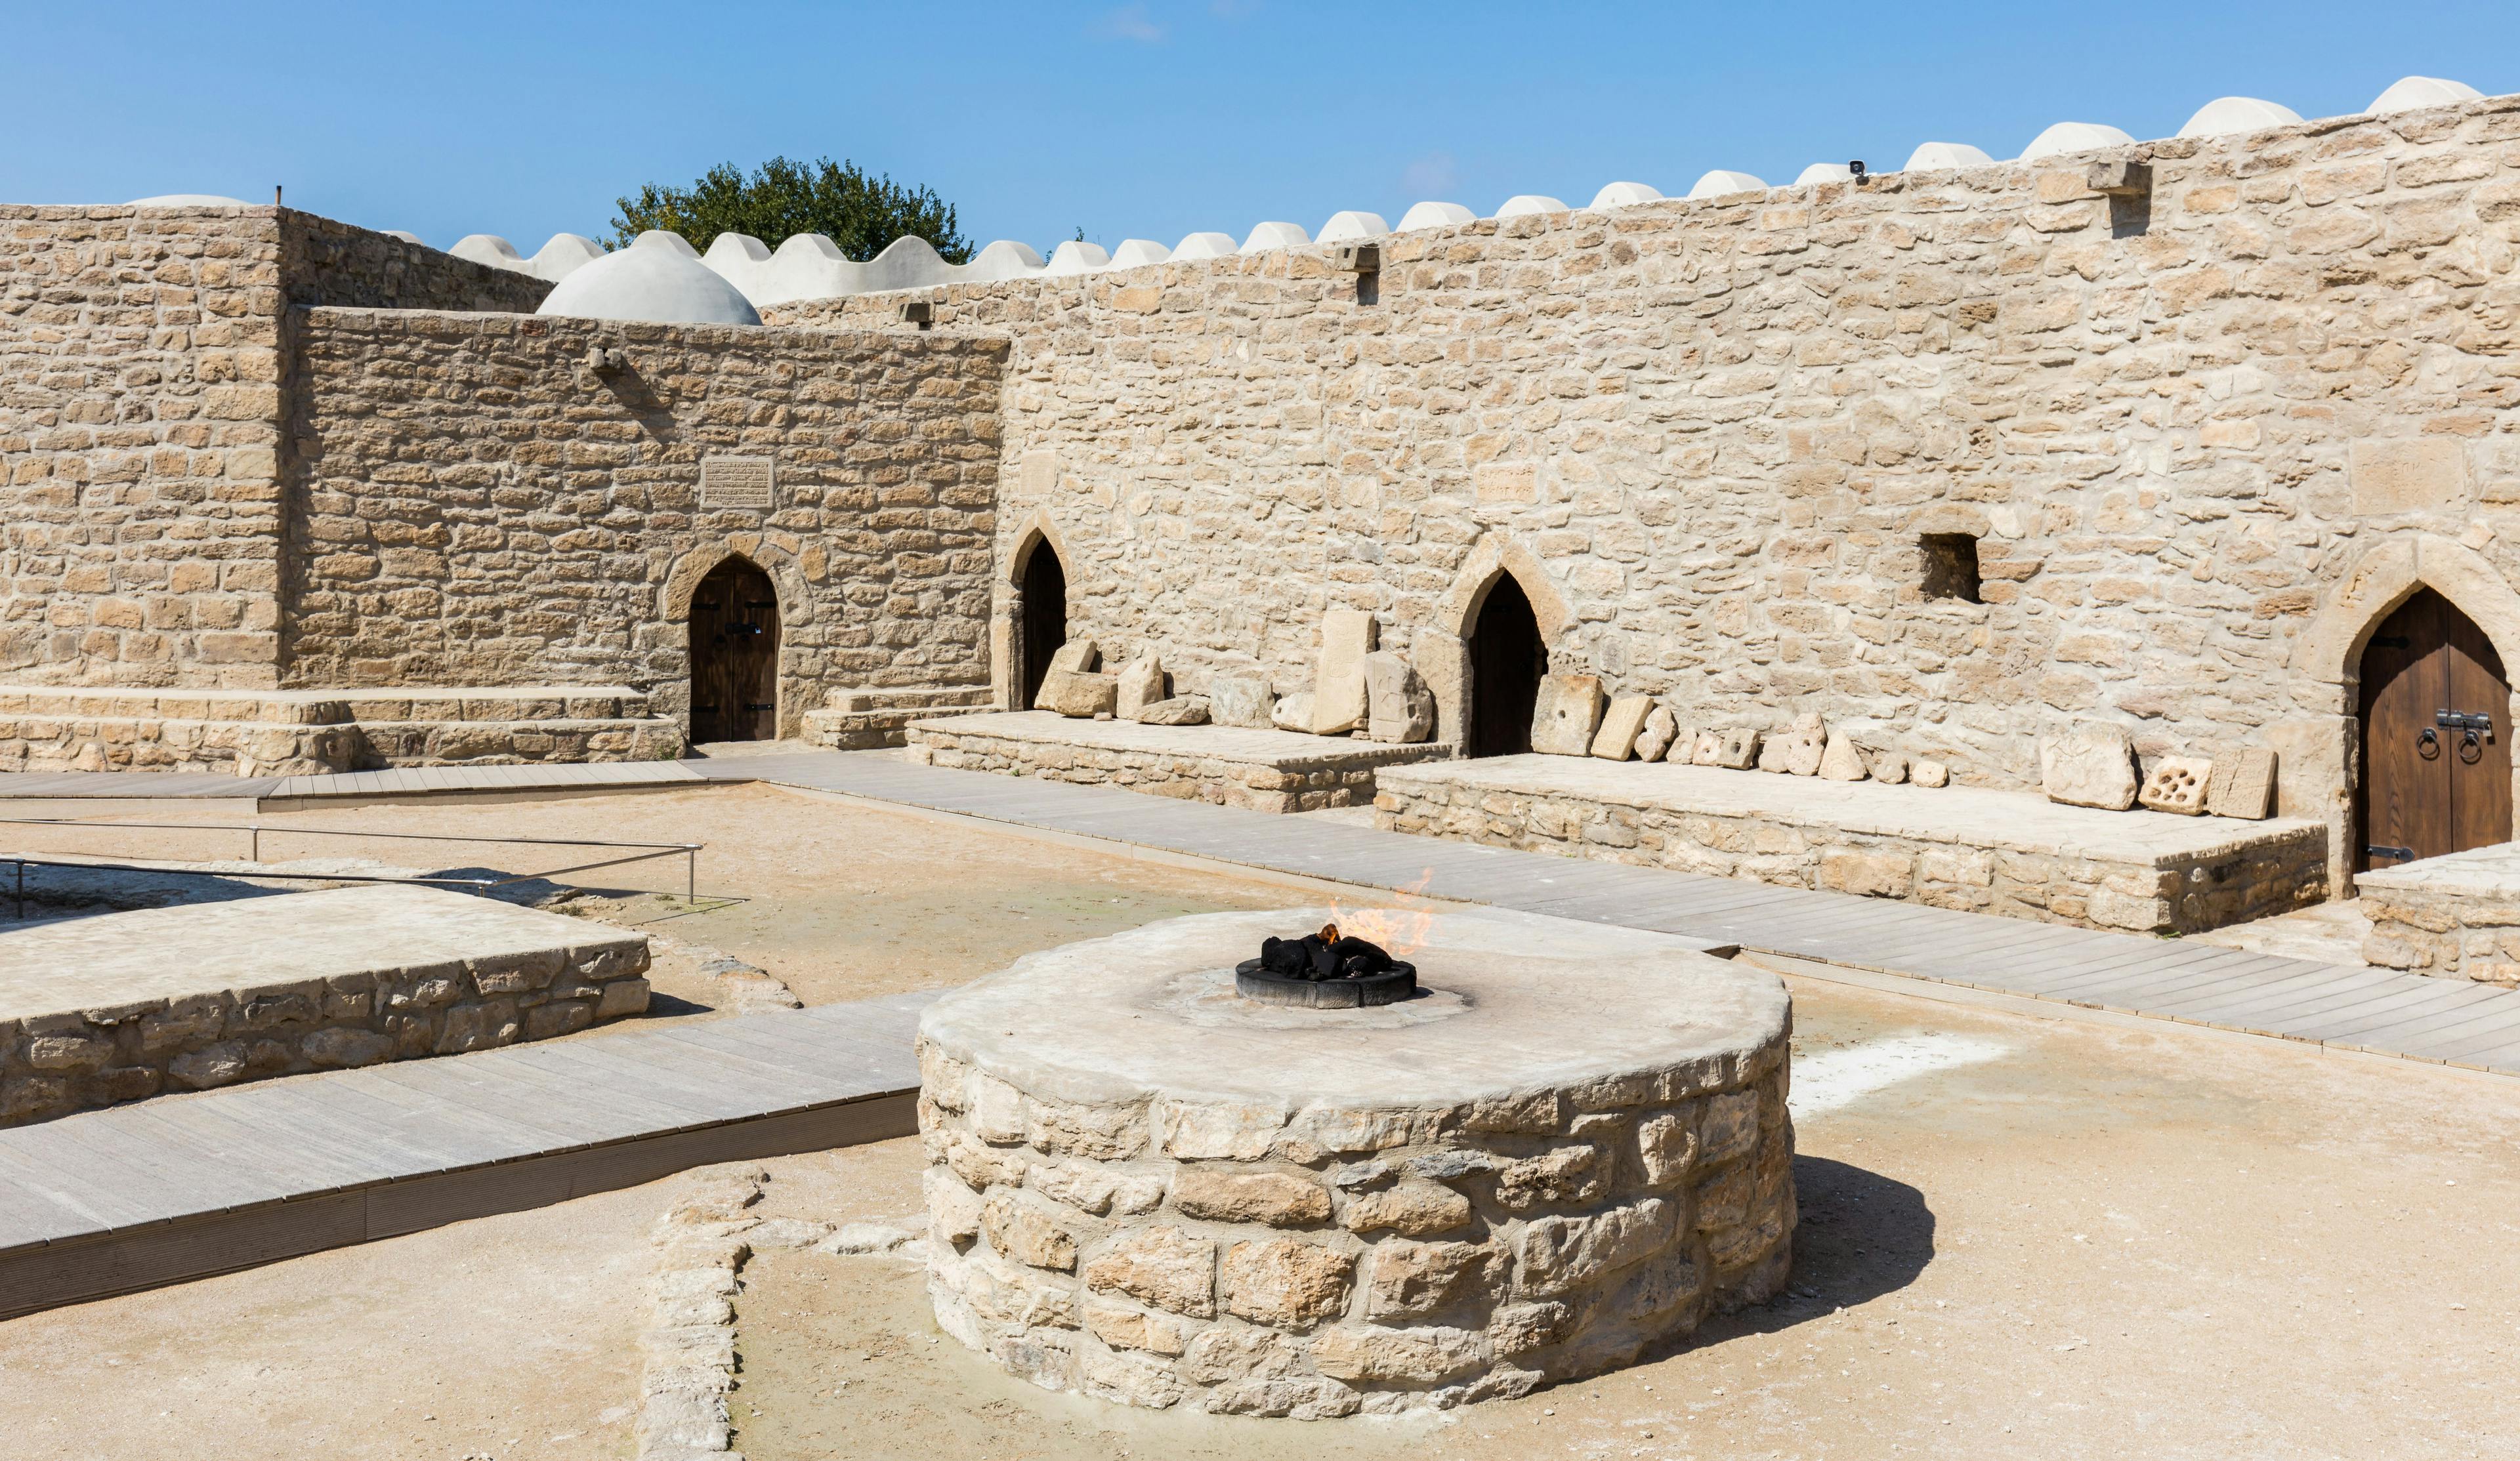 The sacred flame inside the Fire Temple at Baku